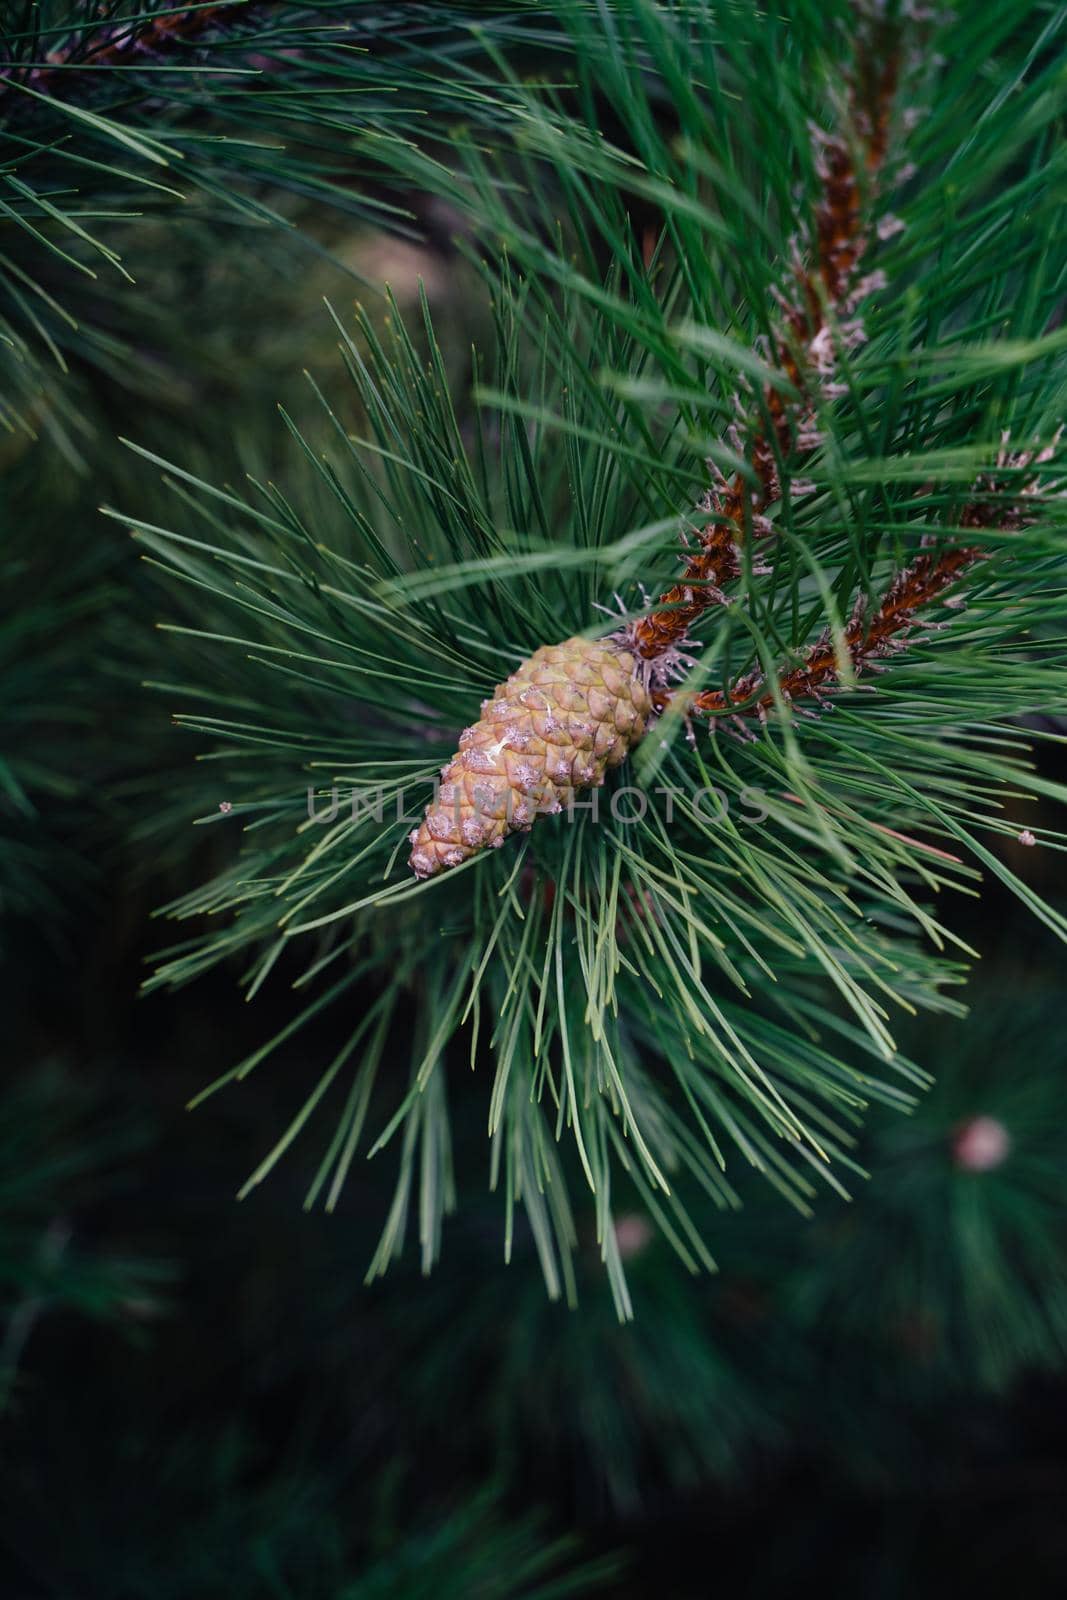 Pine branch with a cone. Close-up of pine needles and a young cone. Natural background. Juicy green needles.